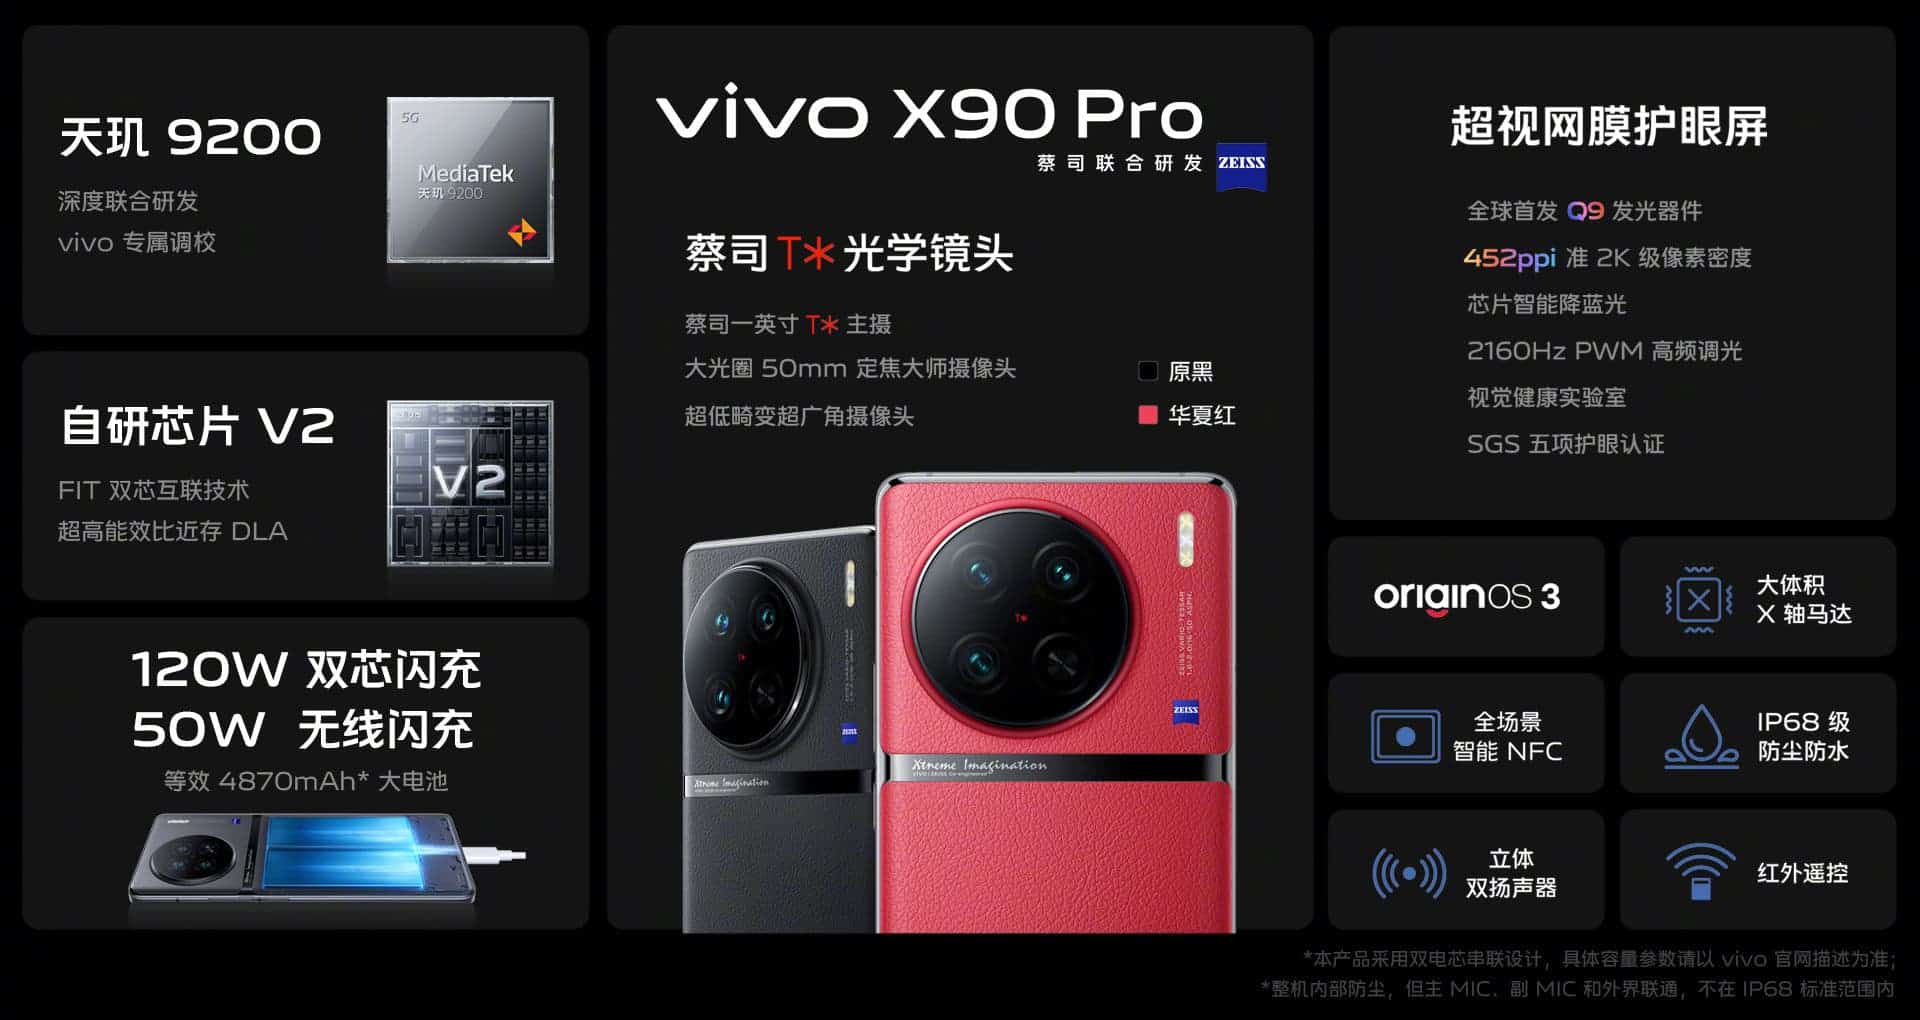 Specifications for VIVO X90 Pro